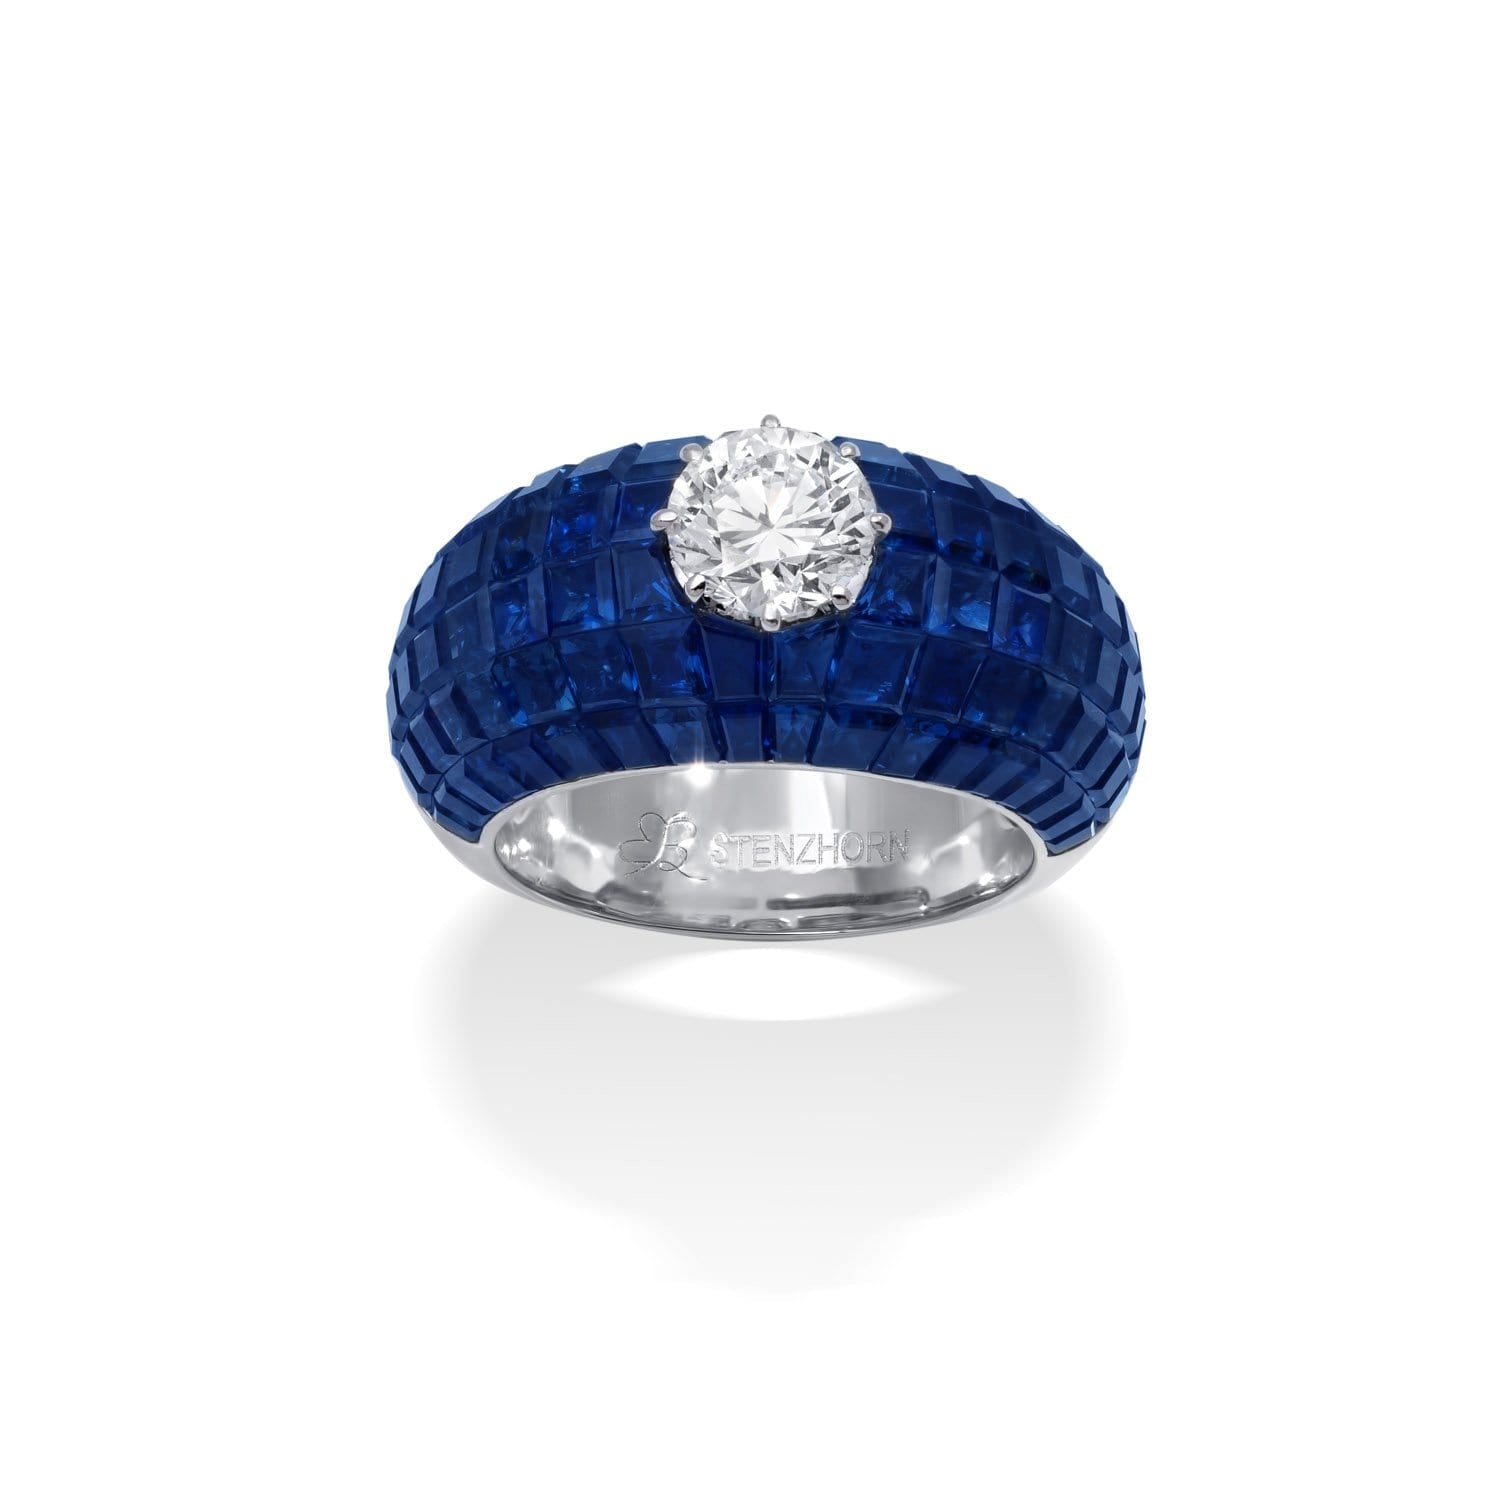 MOSAIC CLASSICAL Sapphire Dome Ring with Round Diamond Center